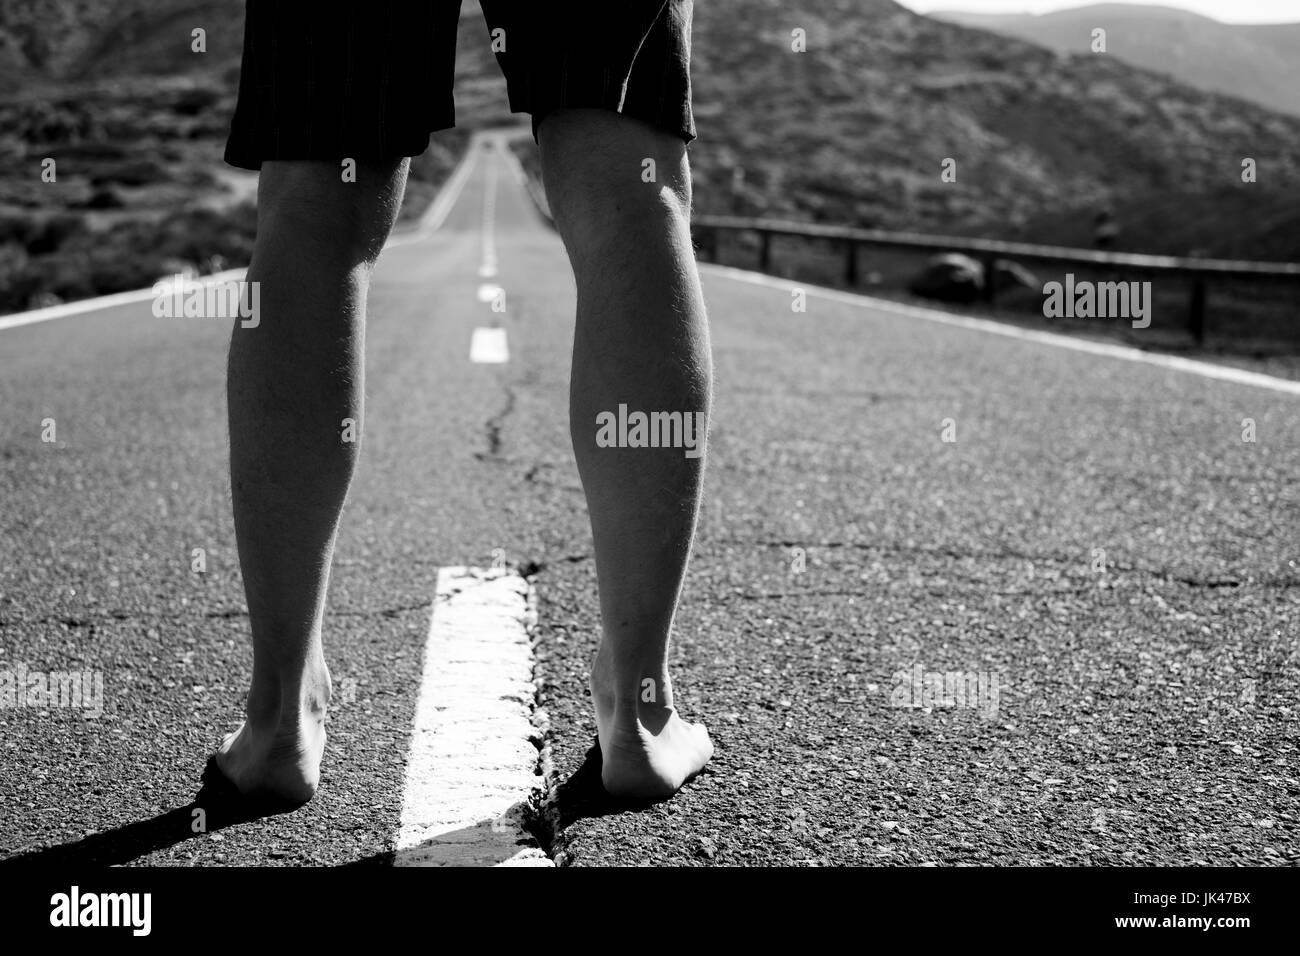 Legs of barefoot Caucasian man standing in middle of road Stock Photo